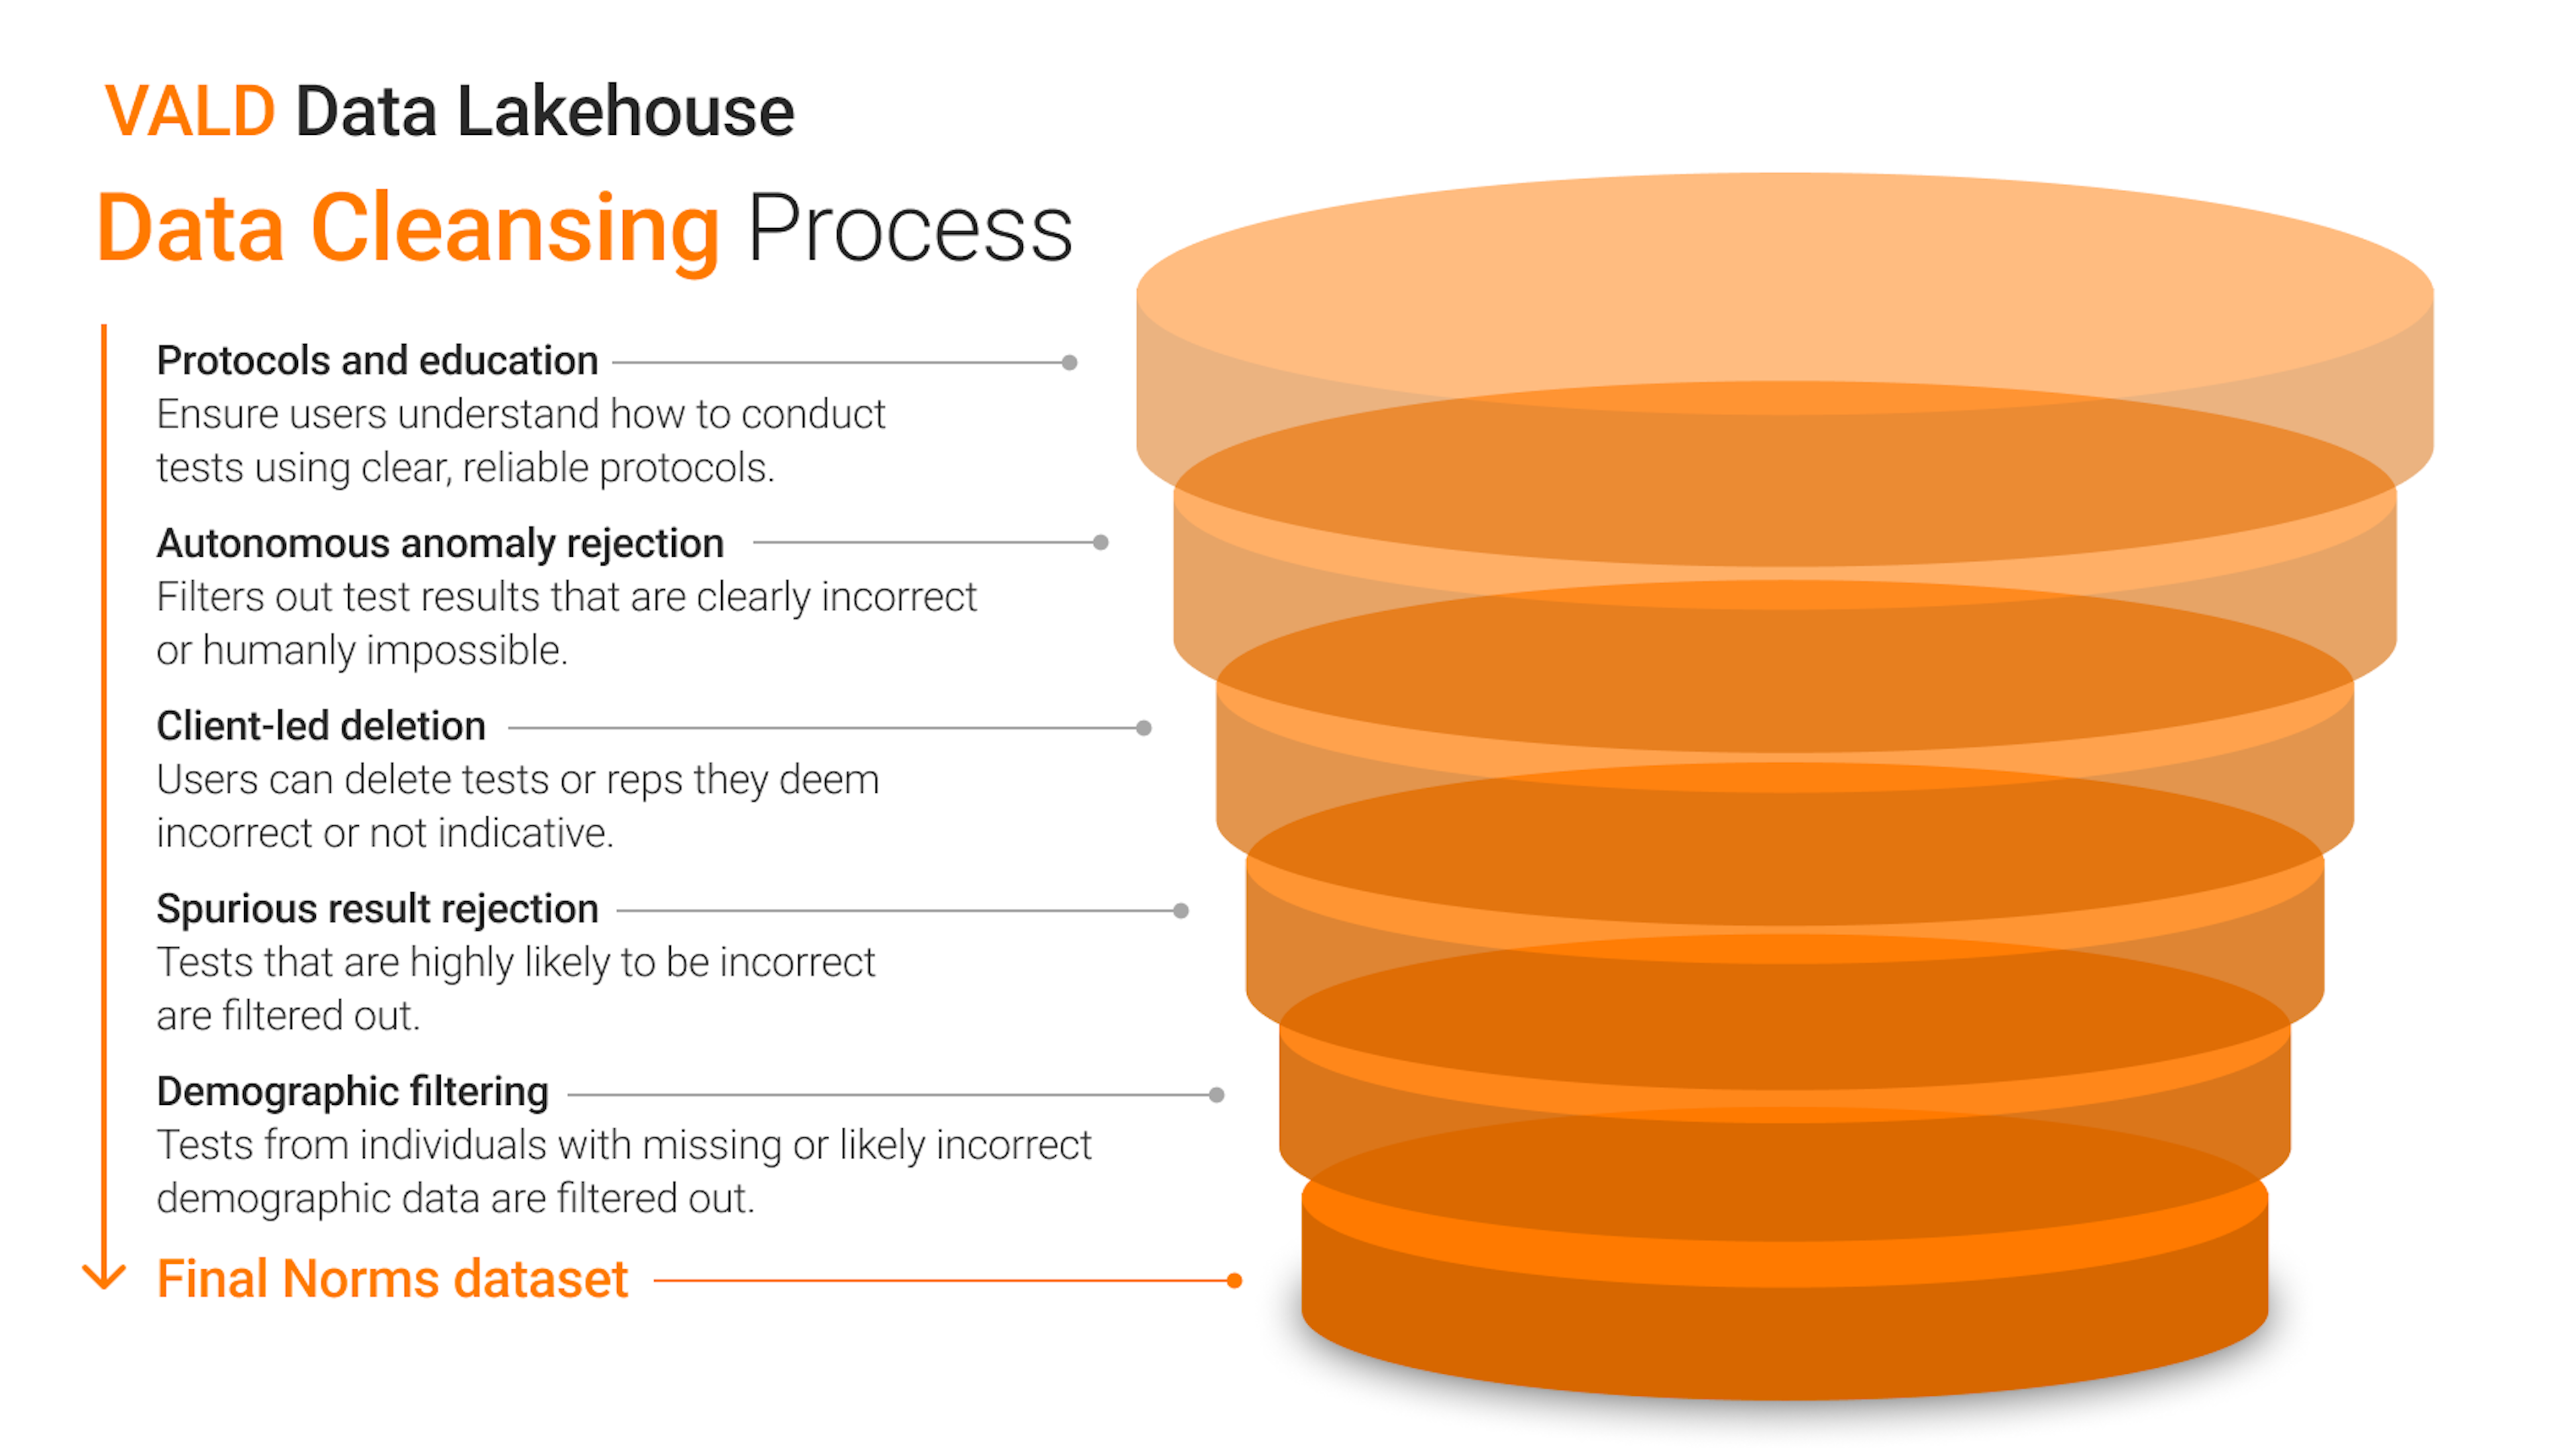 The data cleansing process for the VALD Data Lakehouse, a secure, private database which houses tens of millions of data points from more than one million de-identified individuals.